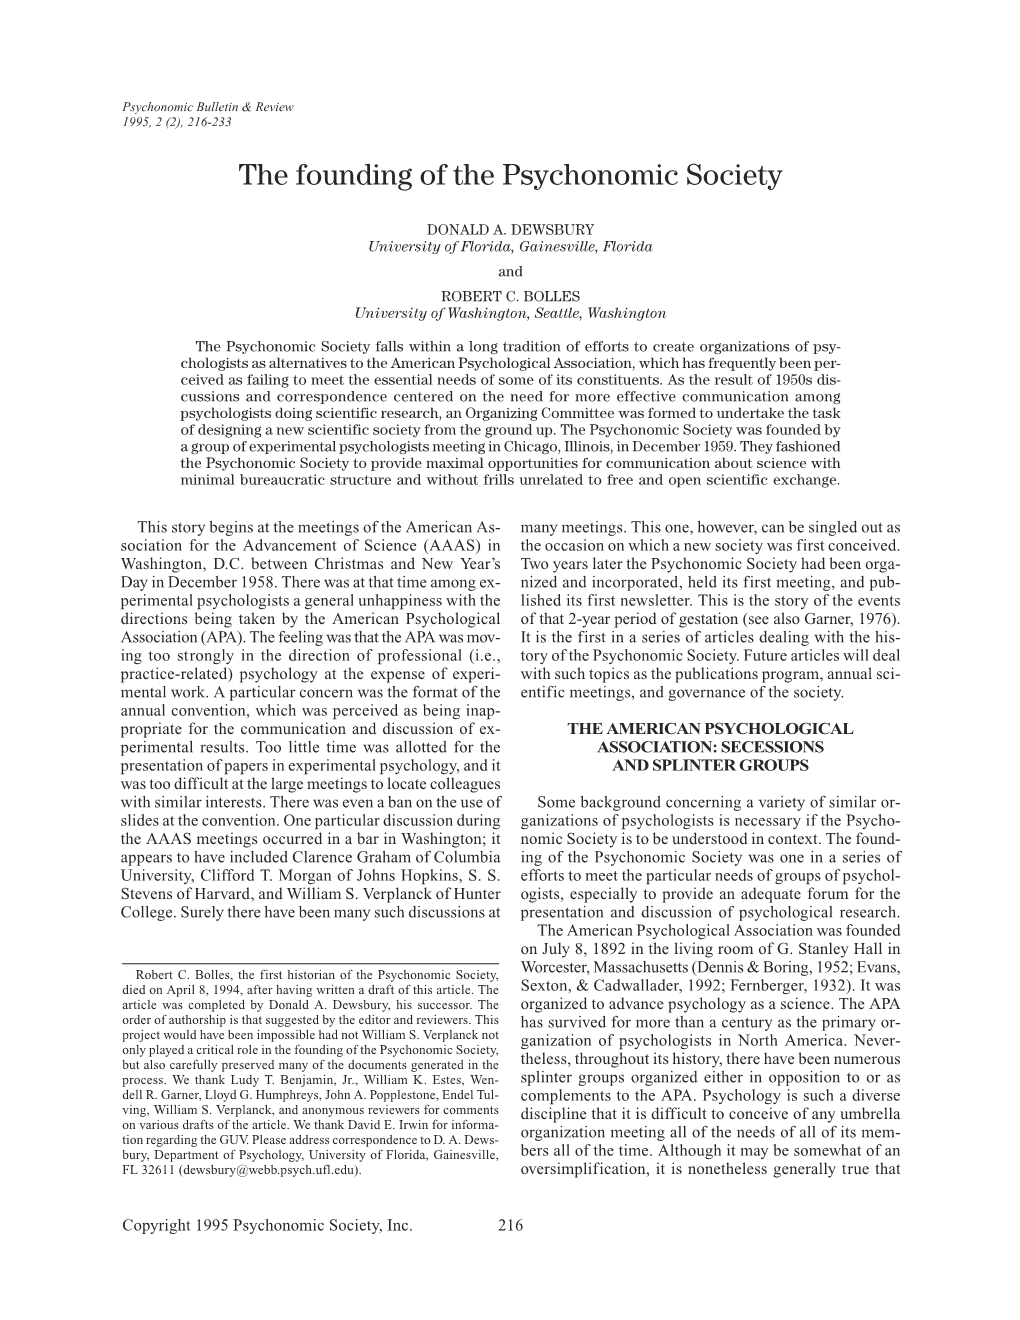 The Founding of the Psychonomic Society